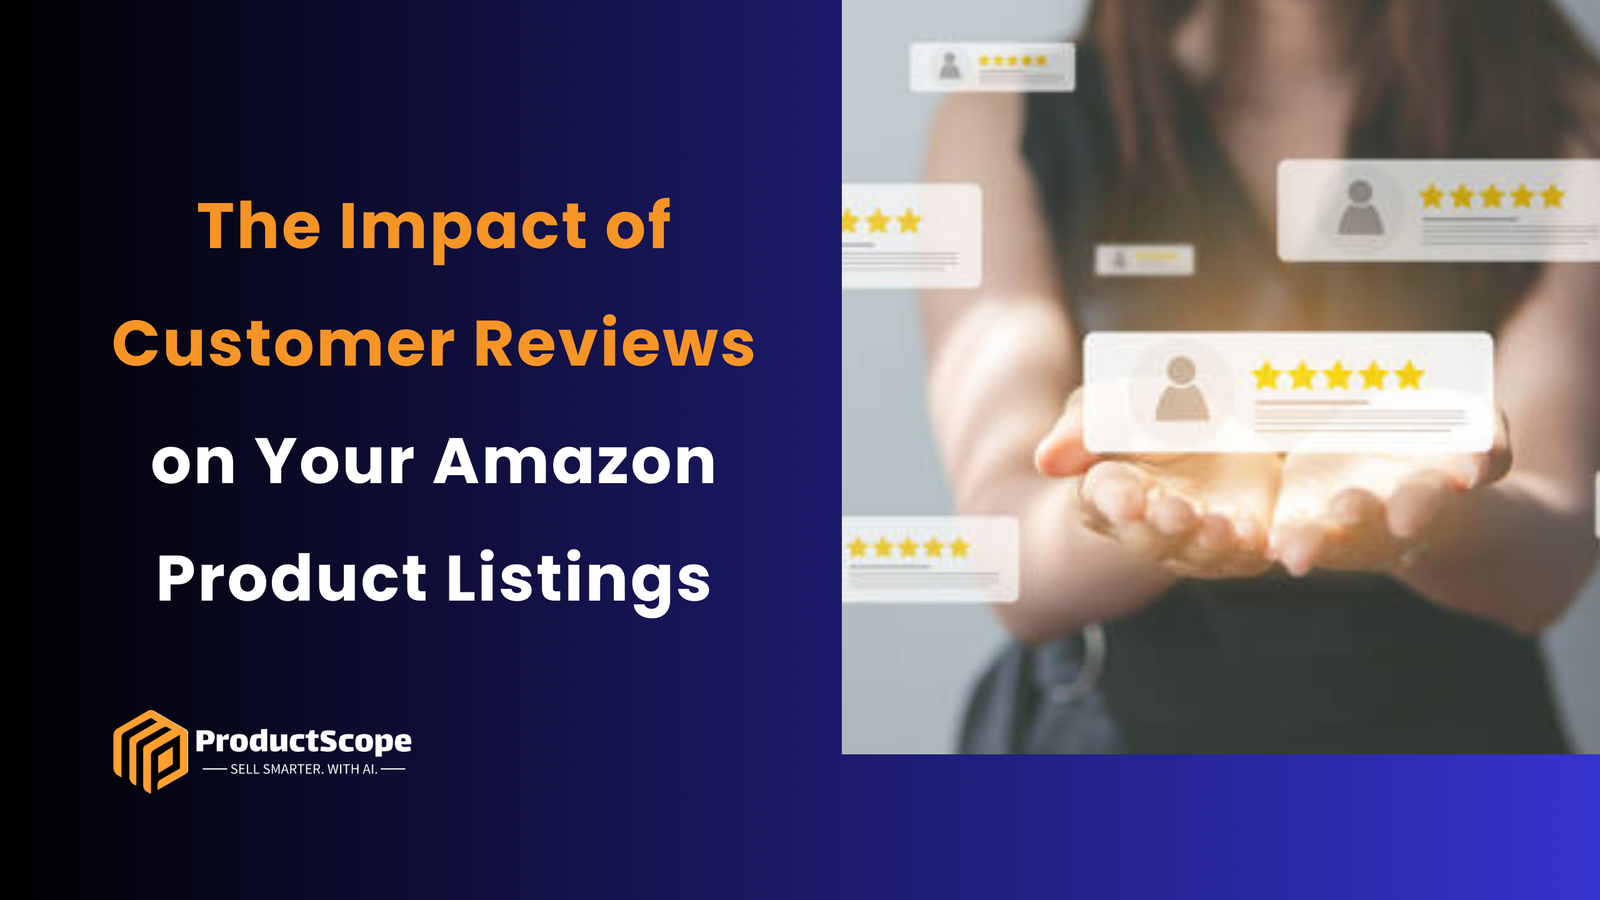 The Impact of Customer Reviews on Your Amazon Product Listings